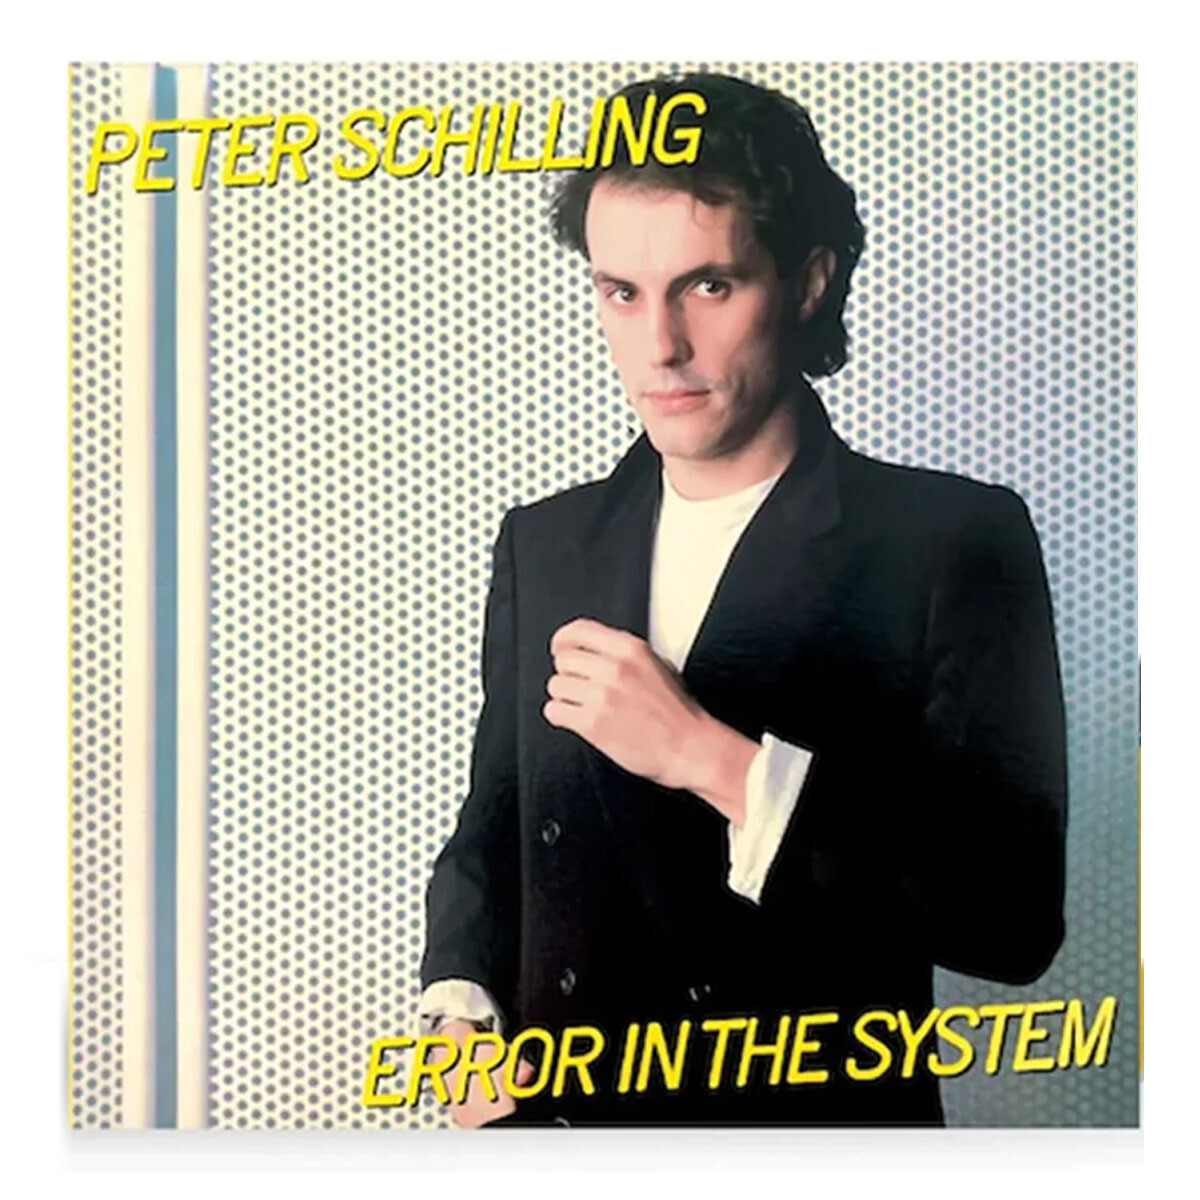 Peter Schilling Error In The System.lp Yellow 